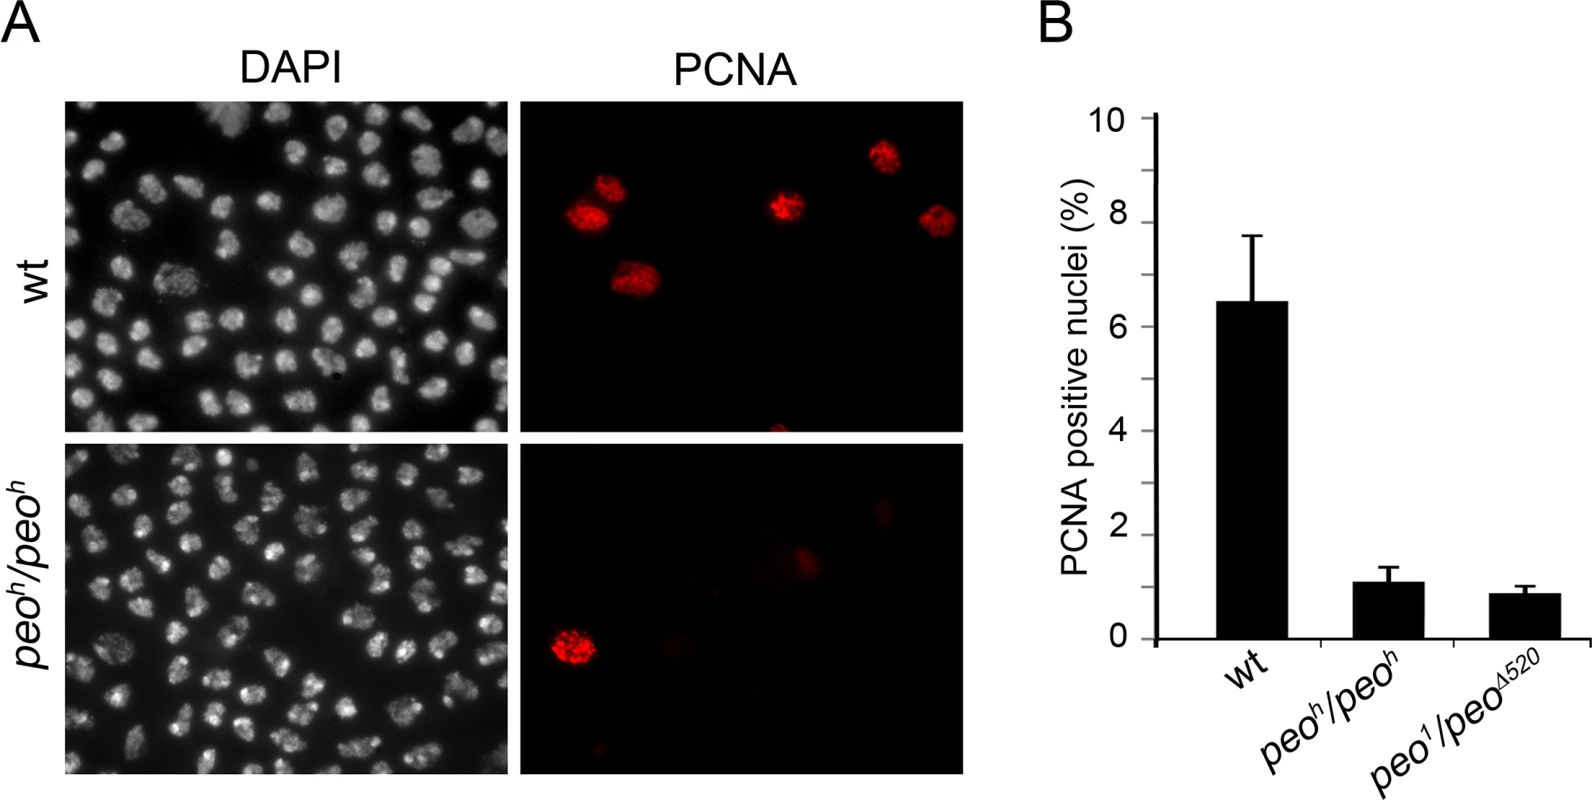 Peo is required for PCNA incorporation into brain cell nuclei.